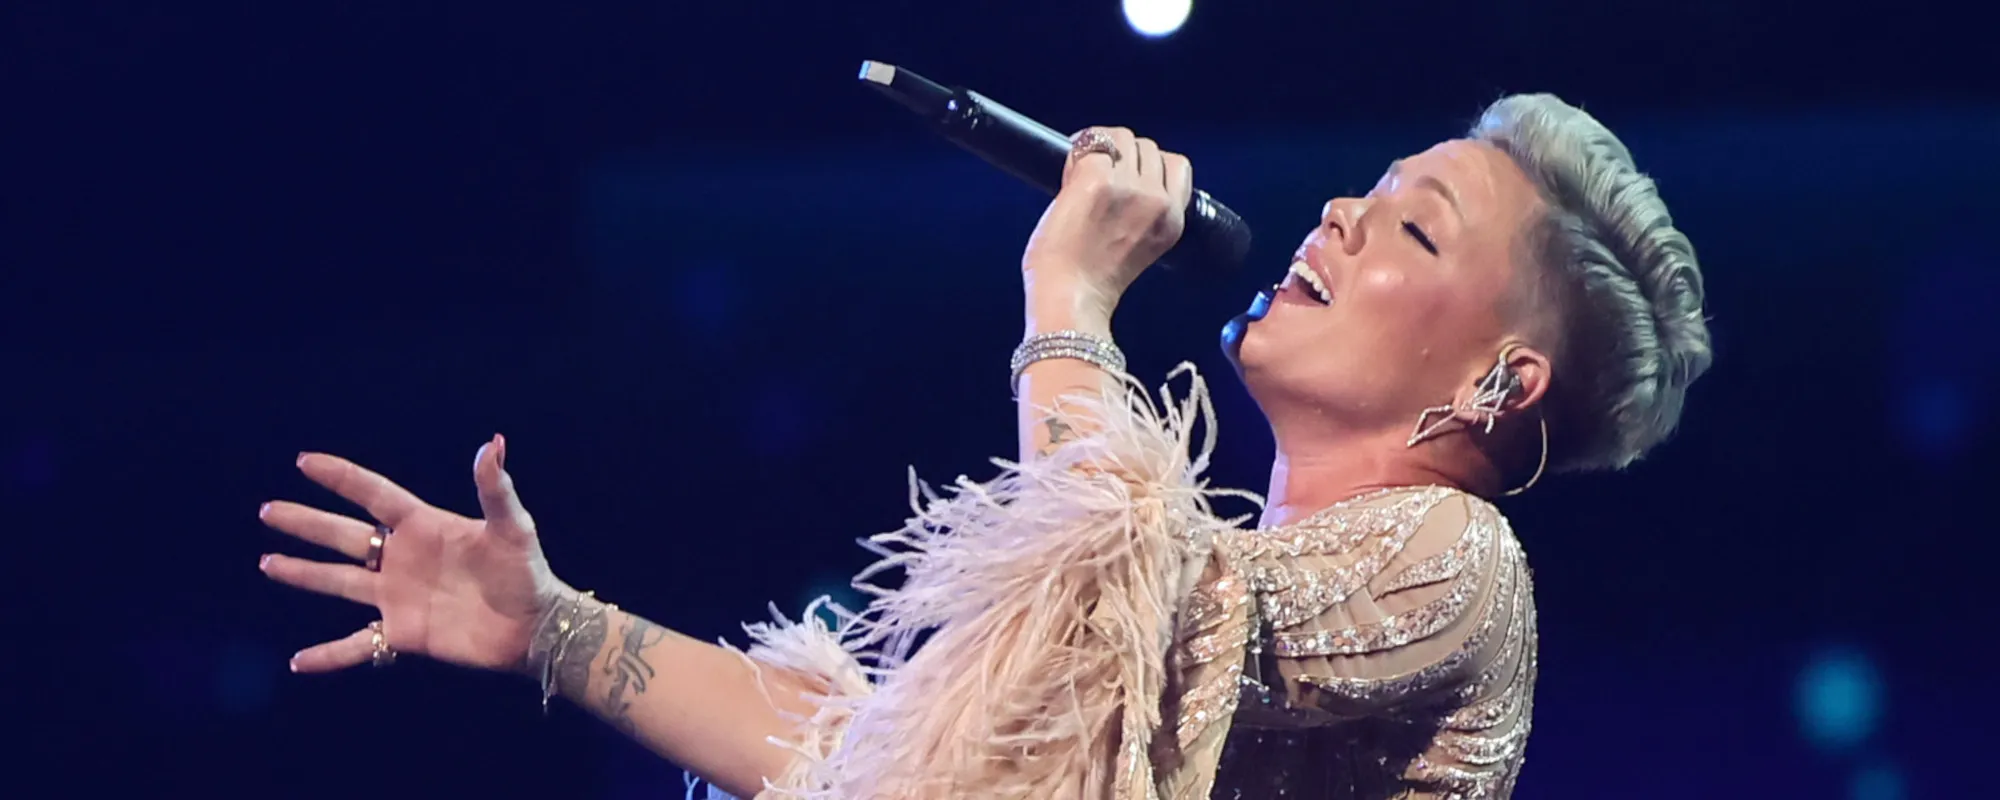 3 Songs You Didn’t Know P!nk Wrote For Other Artists and Film Soundtracks